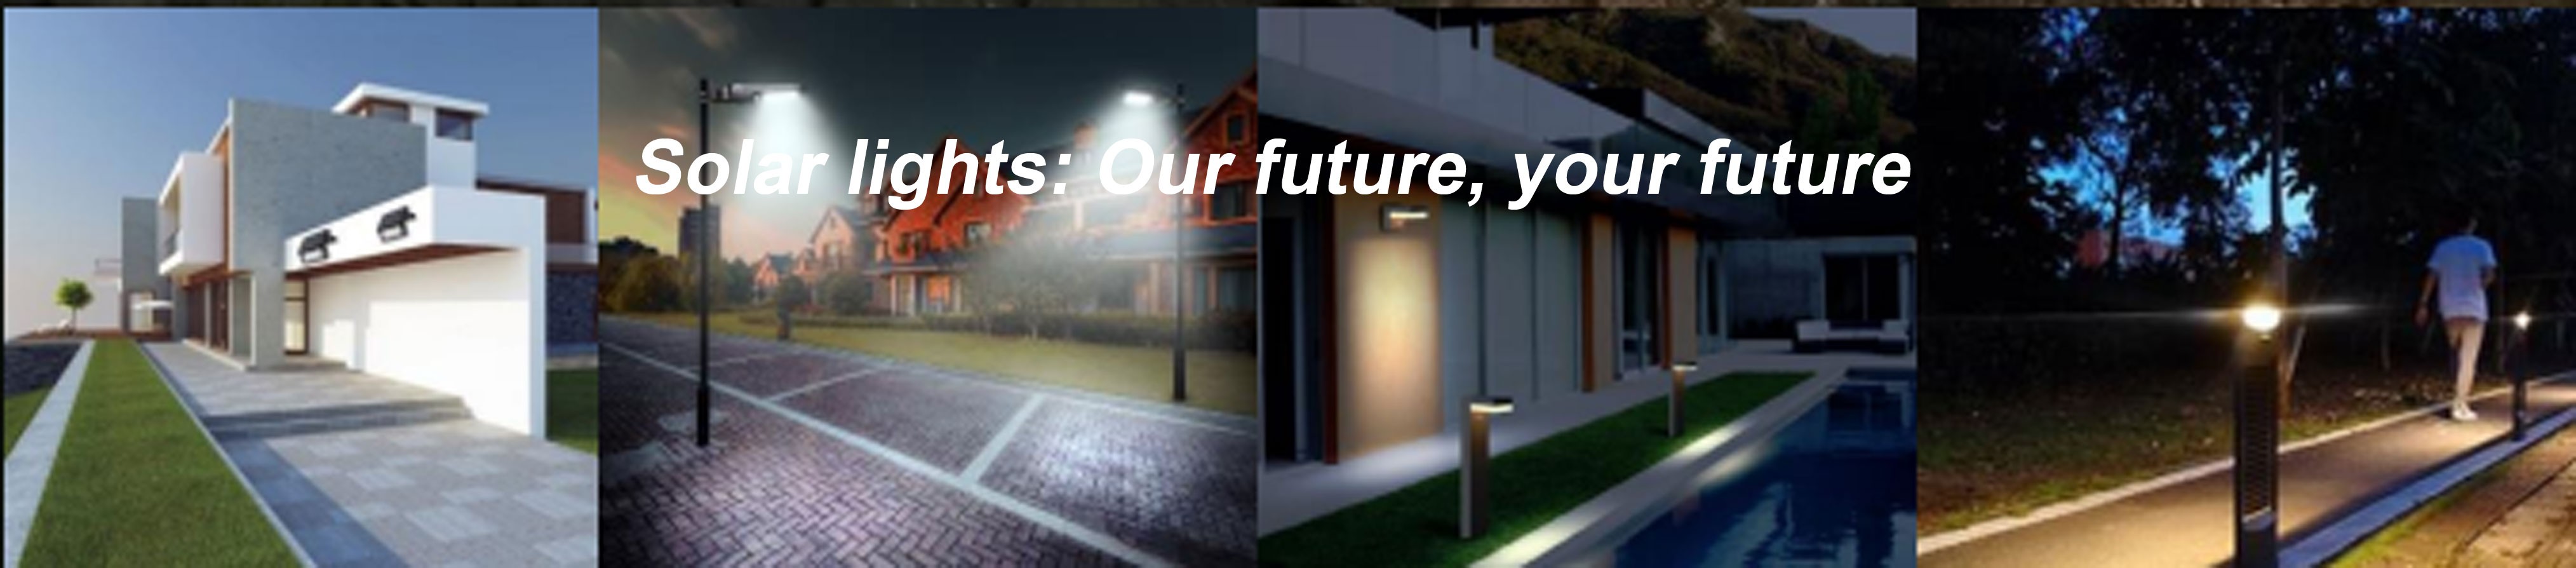 Solar lights: Our future, your future